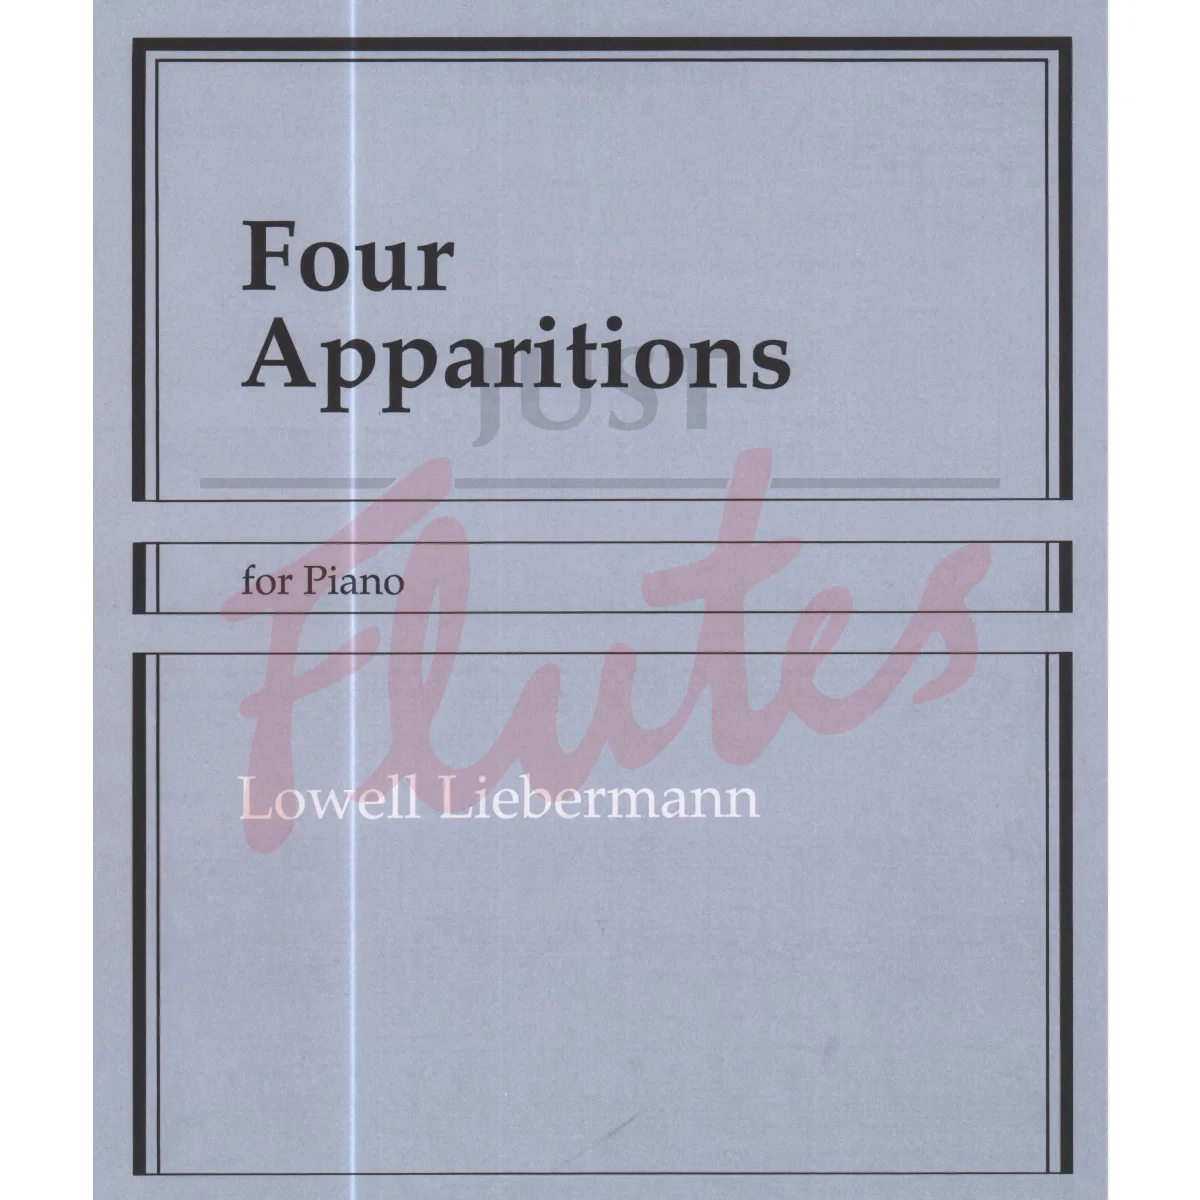 Four Apparitions for Piano